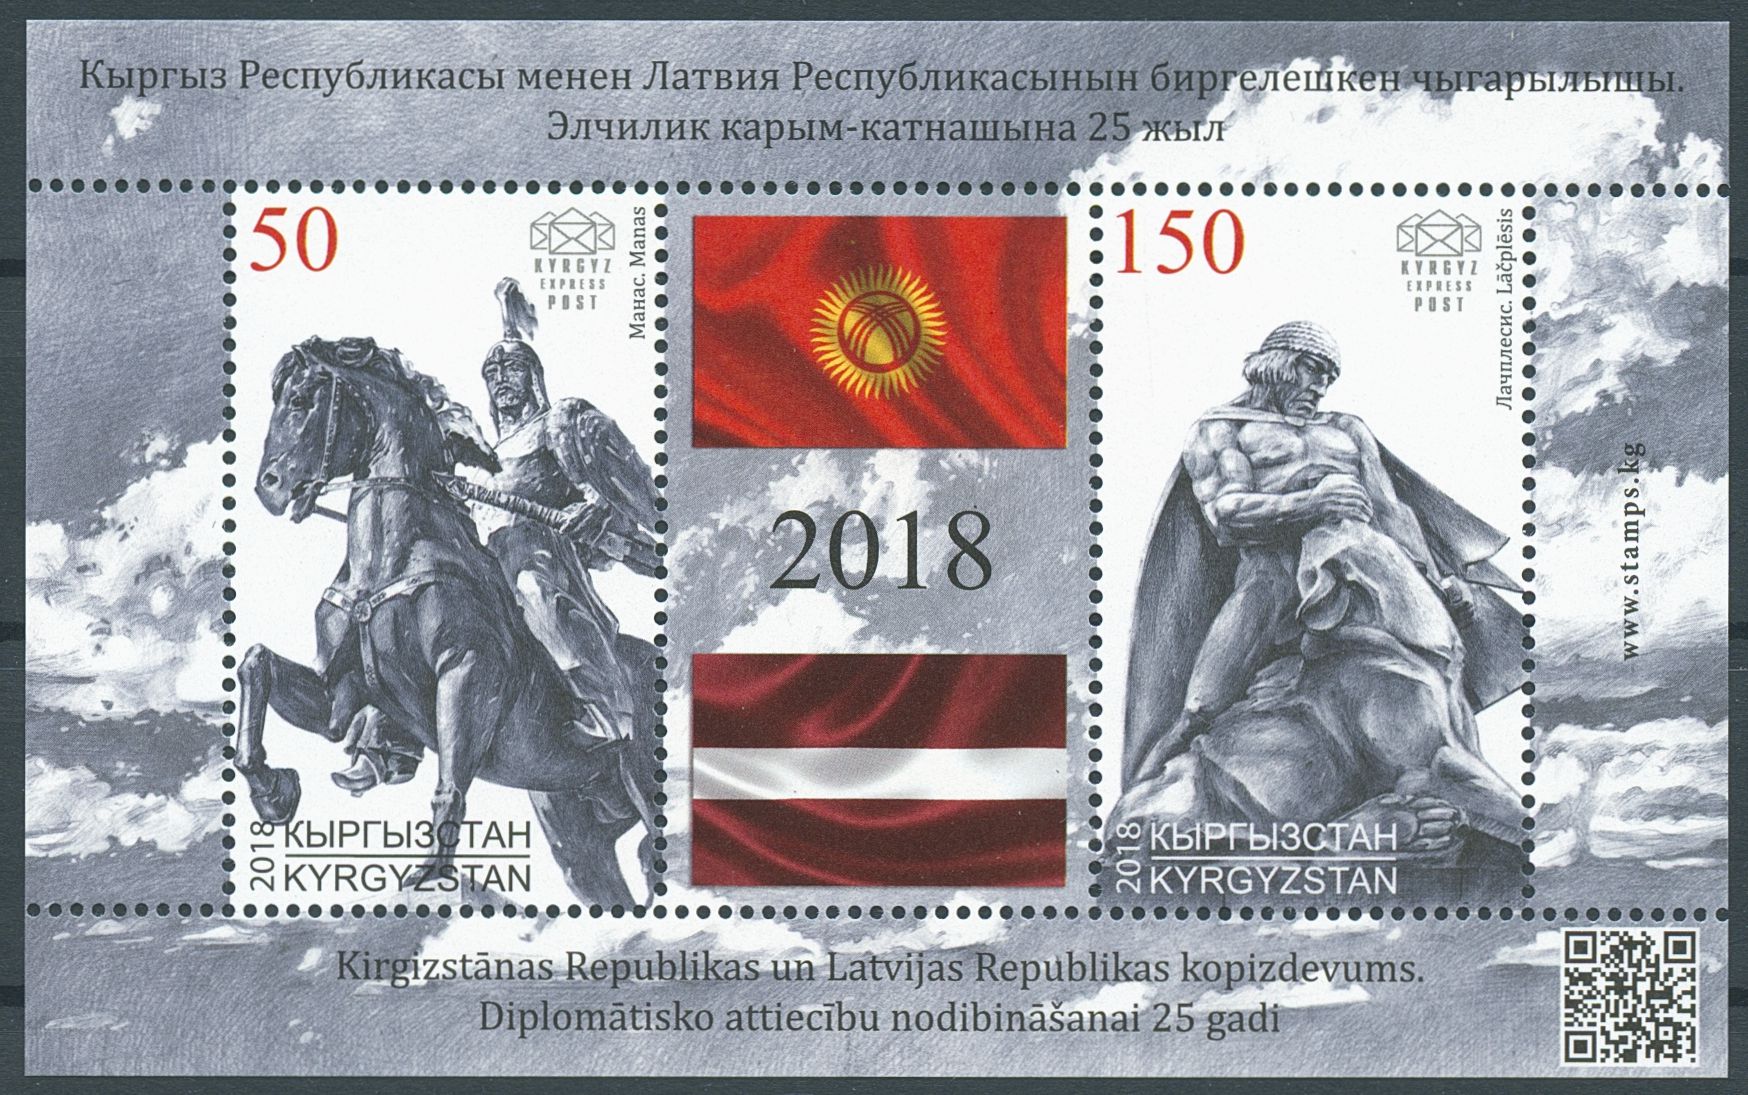 Kyrgyzstan 2018 MNH Diplomatic Relations JIS Latvia 2v M/S Flags Statues Stamps